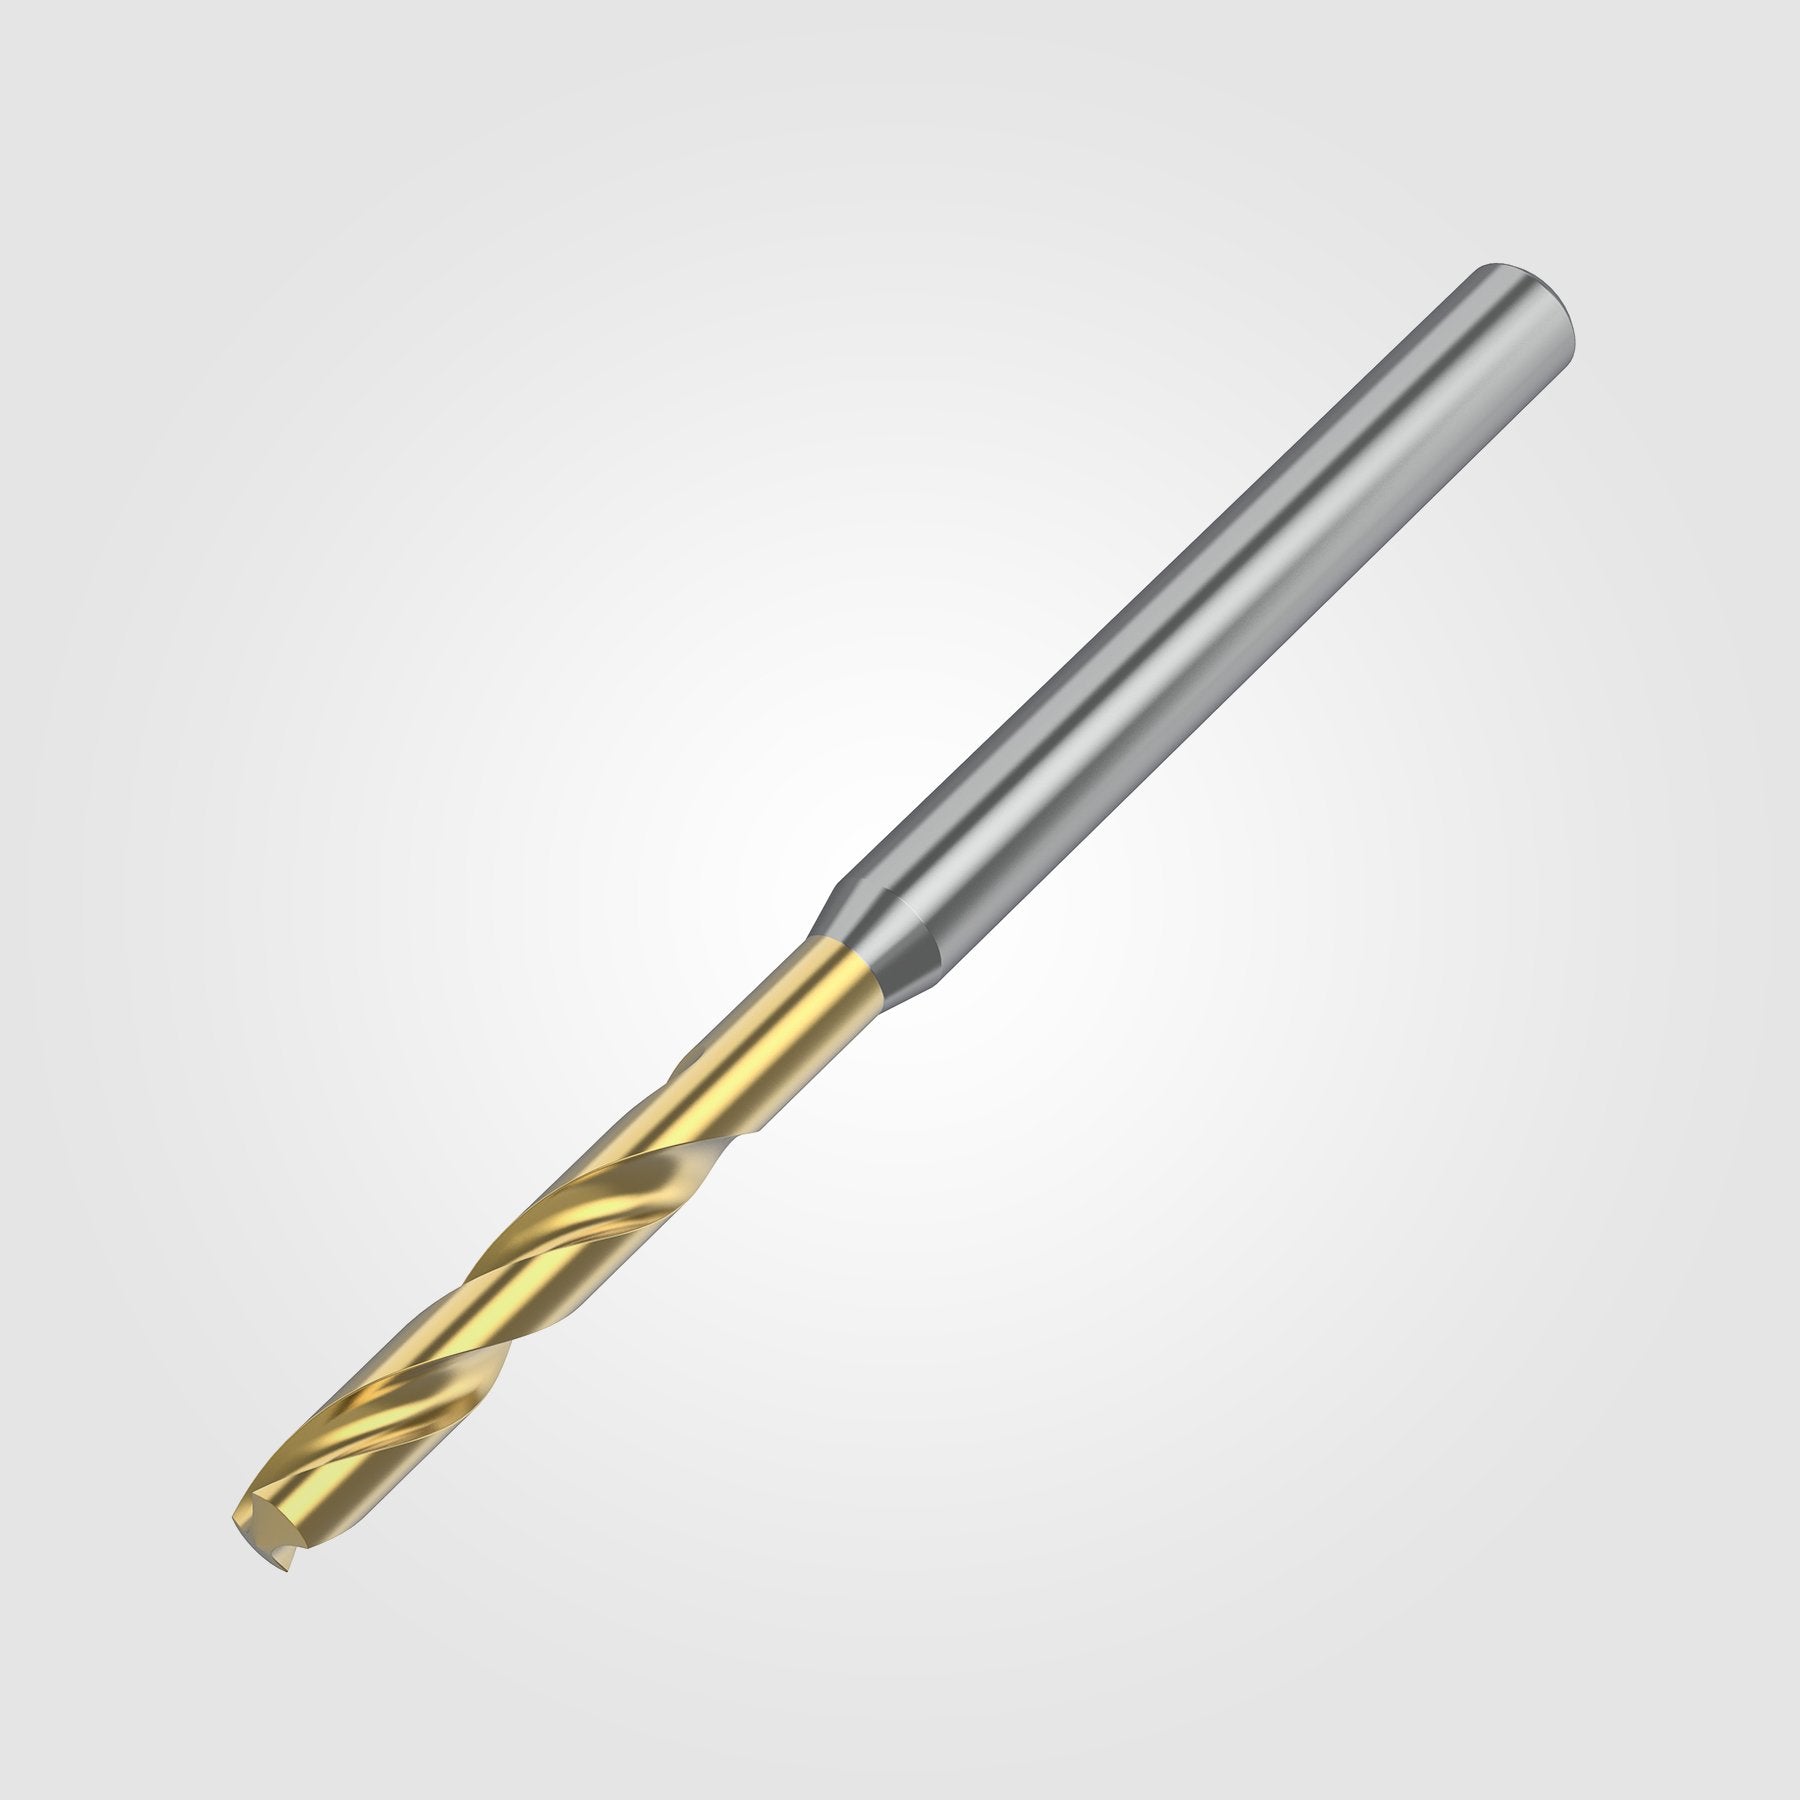 GOdrill (THROUGH COOLANT) | 16.3mm / .6417" / 3xD | SOLID CARBIDE DRILL | 4151280